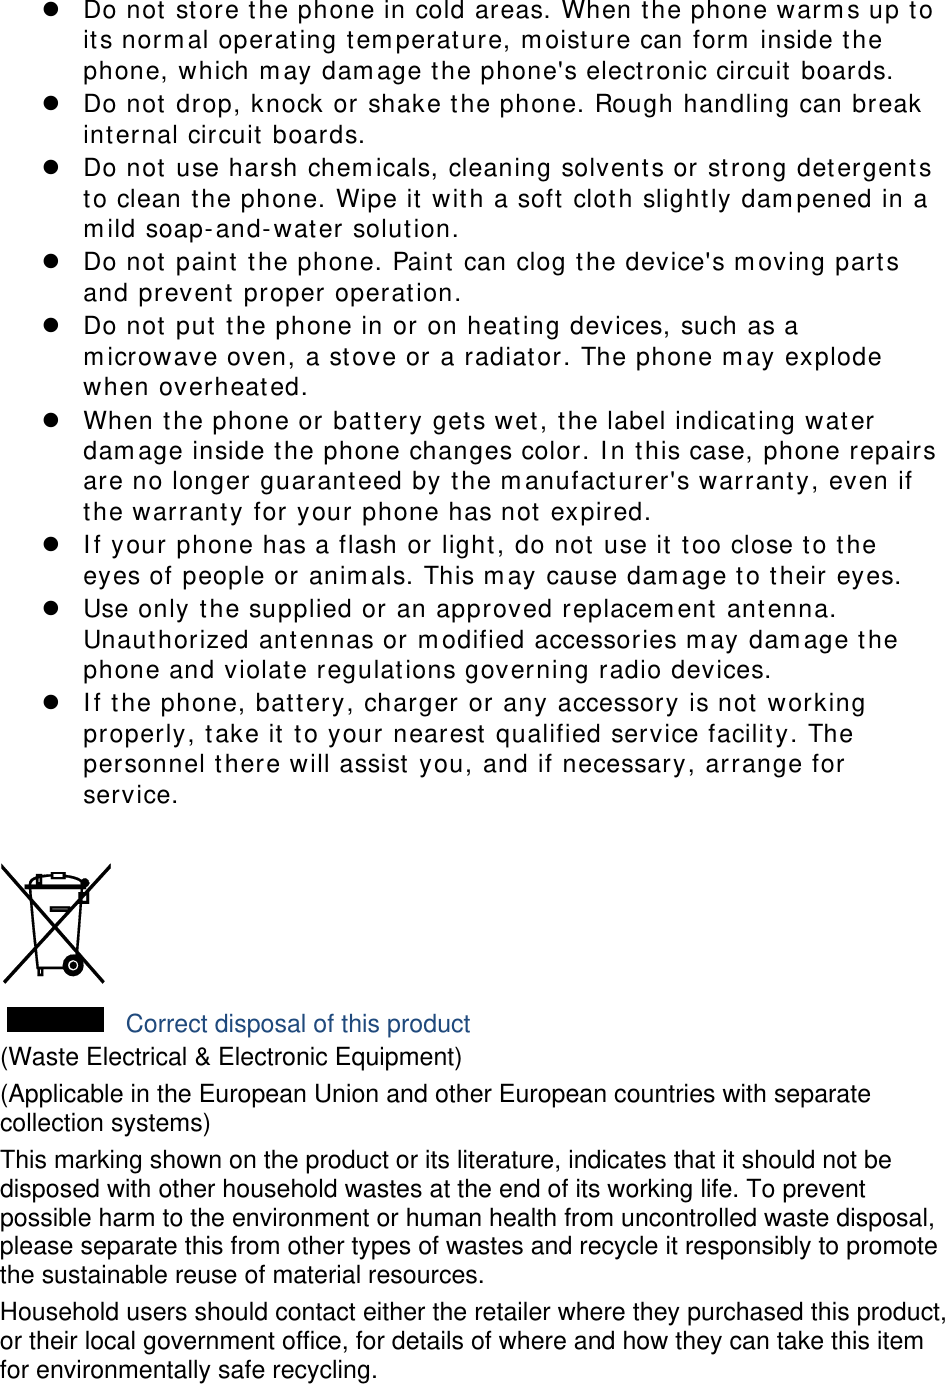  Do not store t he phone in cold areas. When the phone warm s up to its norm al operating tem perat ure, m oist ure can form  inside t he phone, which m ay dam age t he phone&apos;s elect ronic circuit  boards.  Do not drop, knock or shake t he phone. Rough handling can break int ernal circuit boards.  Do not use harsh chem icals, cleaning solvents or st rong detergent s to clean the phone. Wipe it  with a soft  cloth slight ly dam pened in a m ild soap- and-wat er solut ion.  Do not paint  t he phone. Paint can clog t he device&apos;s m oving part s and prevent  proper operation.  Do not put  t he phone in or on heating devices, such as a m icrowave oven, a st ove or a radiator. The phone m ay explode when overheat ed.  When t he phone or bat t ery gets wet, t he label indicat ing water dam age inside t he phone changes color. I n t his case, phone repairs are no longer guarant eed by t he m anufacturer&apos;s warrant y, even if the warranty for your phone has not expired.    I f your phone has a flash or light, do not use it  t oo close t o t he eyes of people or anim als. This m ay cause dam age t o t heir eyes.  Use only the supplied or an approved replacem ent  ant enna. Unaut horized ant ennas or m odified accessories m ay dam age t he phone and violat e regulat ions governing radio devices.  I f t he phone, battery, charger or any accessory is not working properly, t ake it  t o your nearest qualified service facilit y. The personnel t here will assist  you, and if necessary, arrange for service.   Correct disposal of this product (Waste Electrical &amp; Electronic Equipment) (Applicable in the European Union and other European countries with separate collection systems) This marking shown on the product or its literature, indicates that it should not be disposed with other household wastes at the end of its working life. To prevent possible harm to the environment or human health from uncontrolled waste disposal, please separate this from other types of wastes and recycle it responsibly to promote the sustainable reuse of material resources. Household users should contact either the retailer where they purchased this product, or their local government office, for details of where and how they can take this item for environmentally safe recycling. 